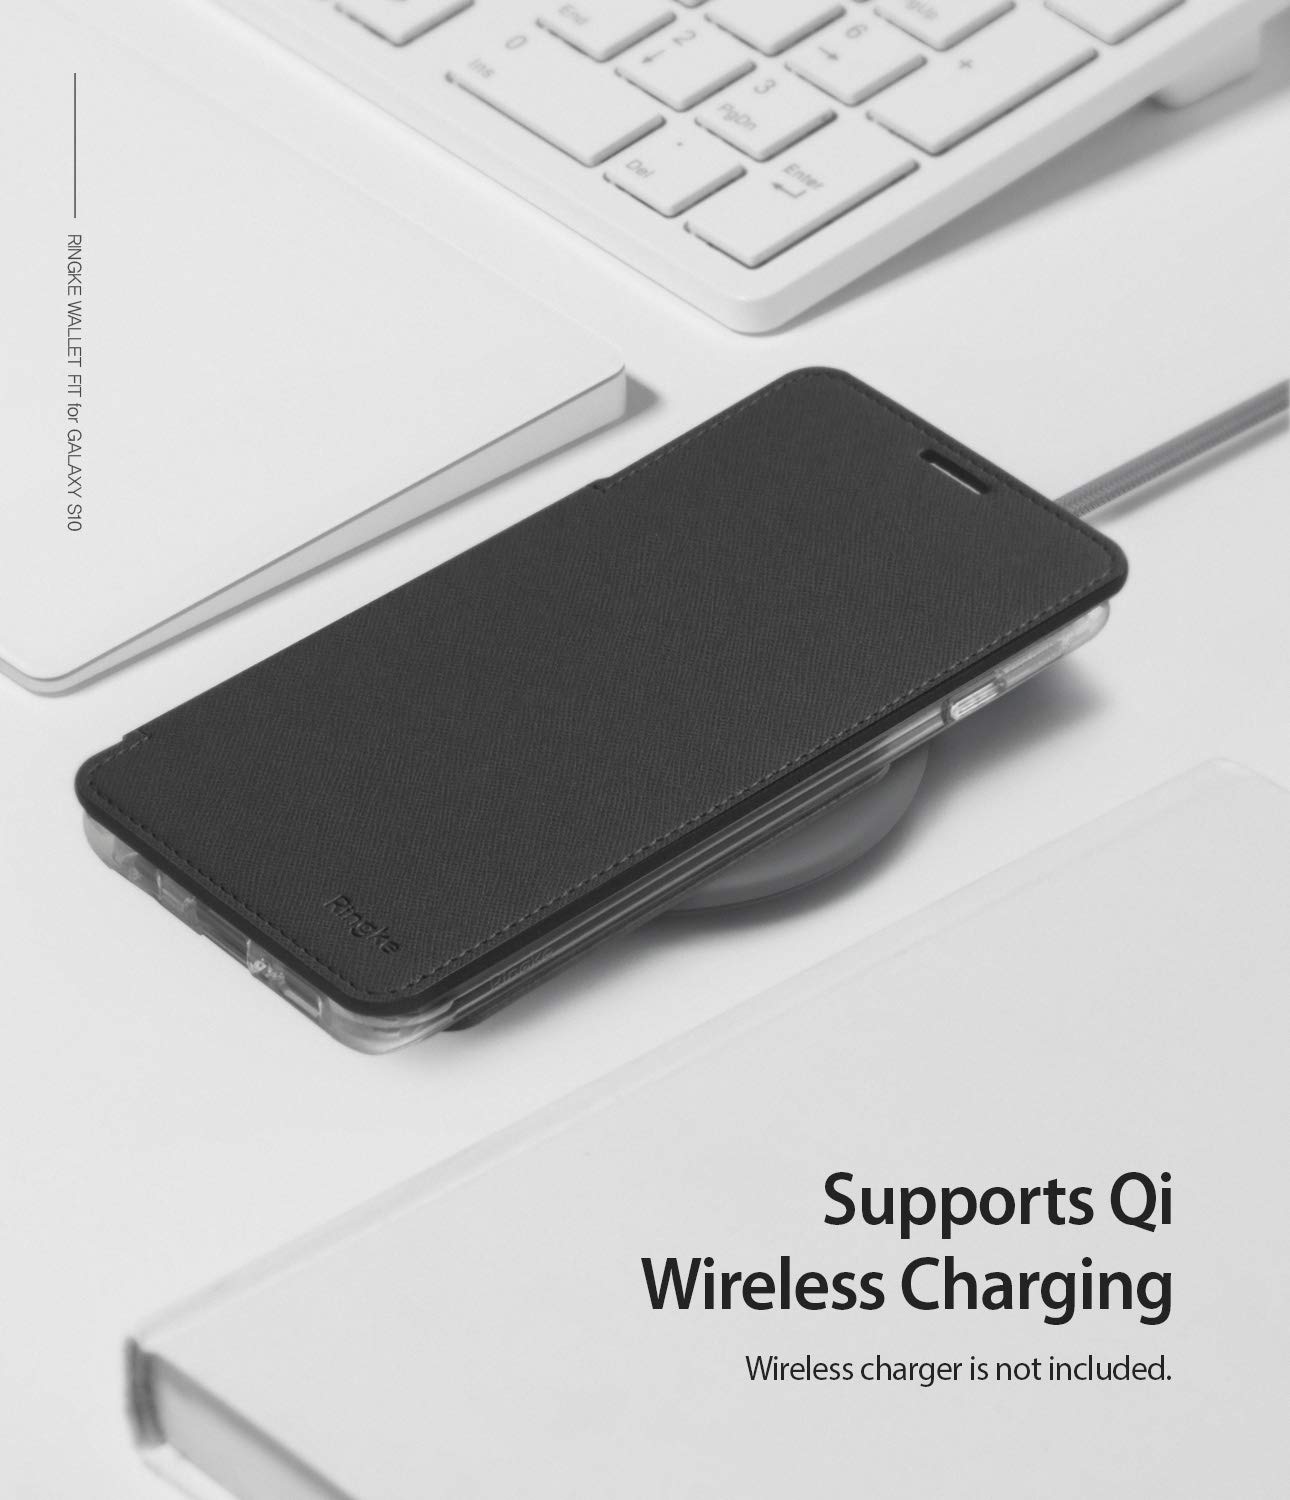 supports qi / wireless charge / powershare